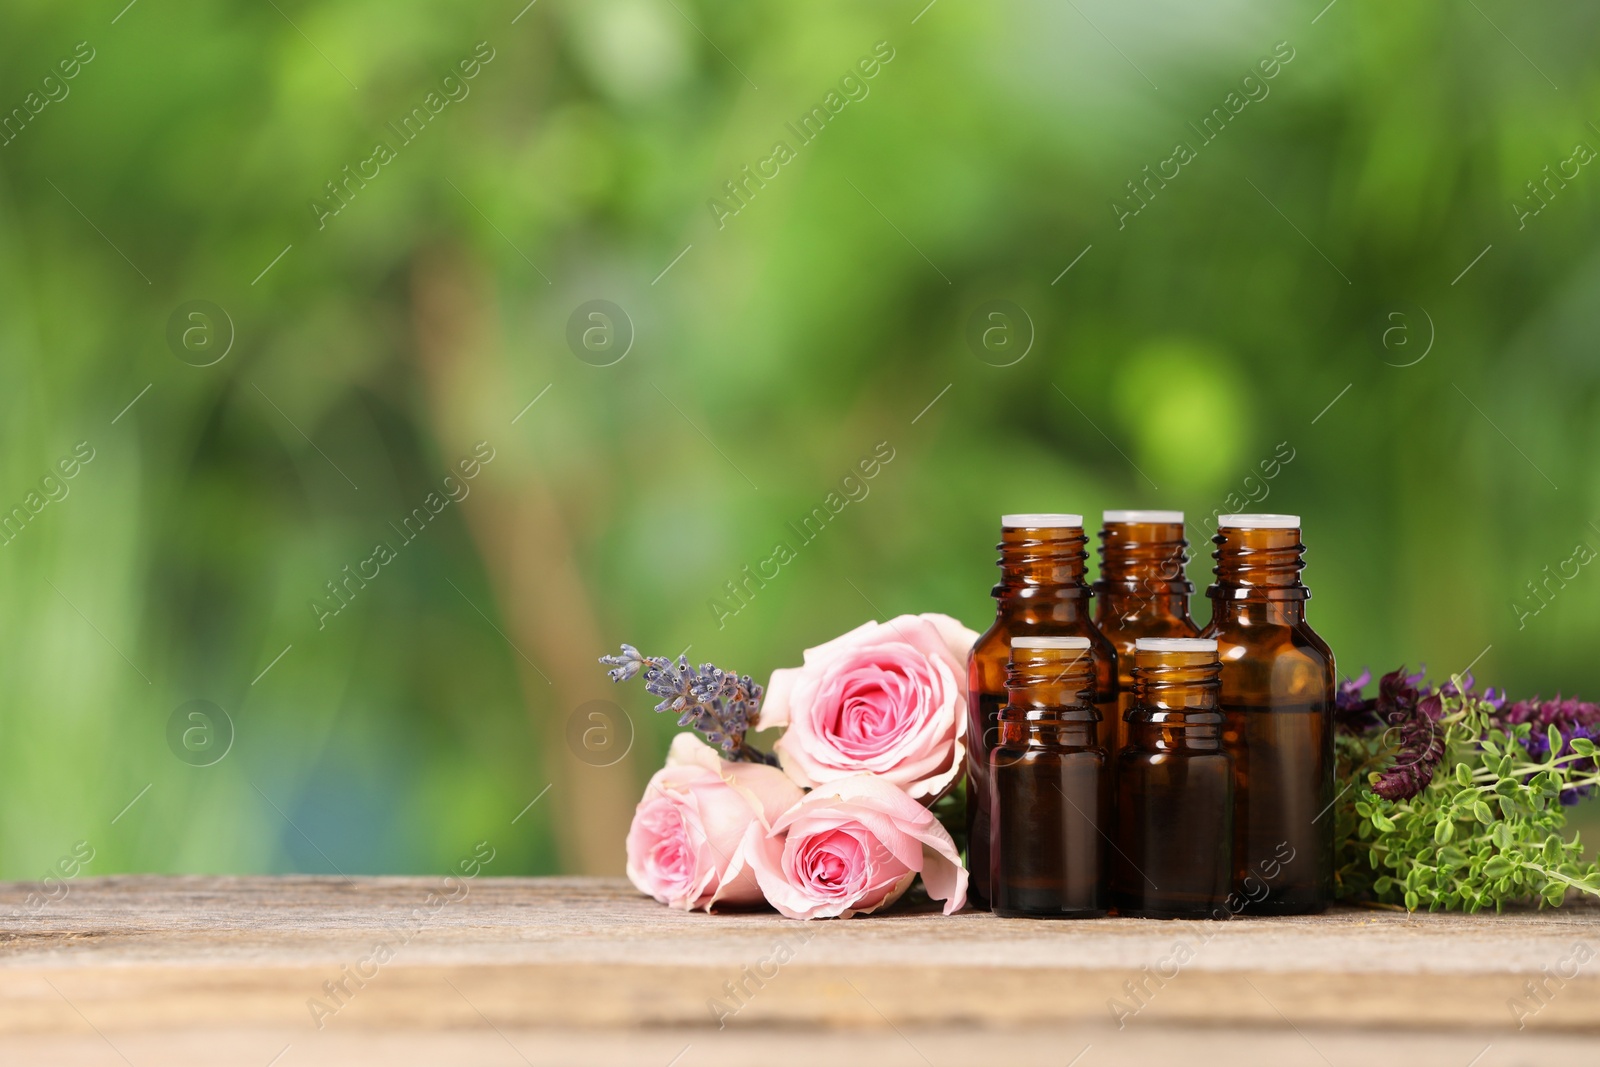 Photo of Bottles with essential oils, herbs and flowers on wooden table against blurred green background. Space for text